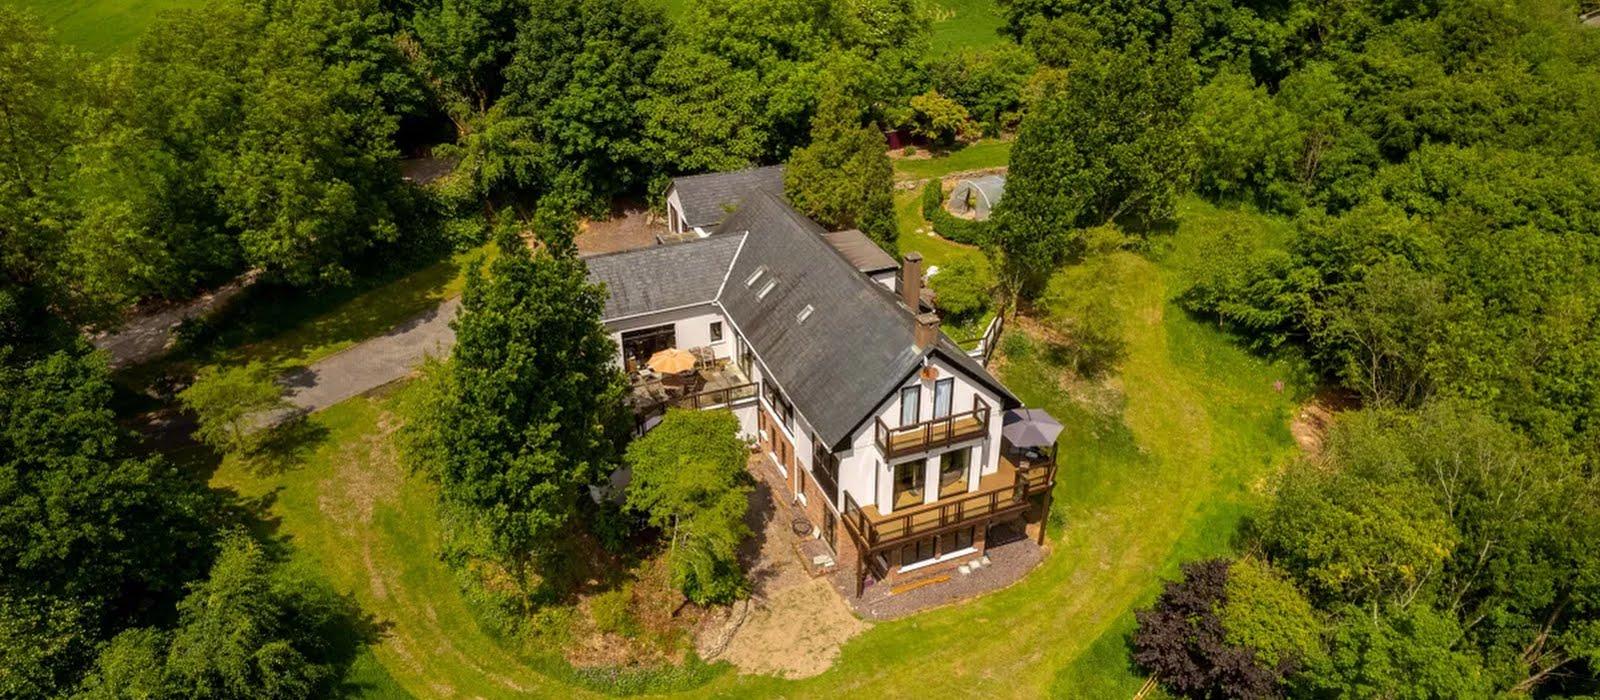 This light-filled Cork home with expansive garden space is on the market for €1.25 million